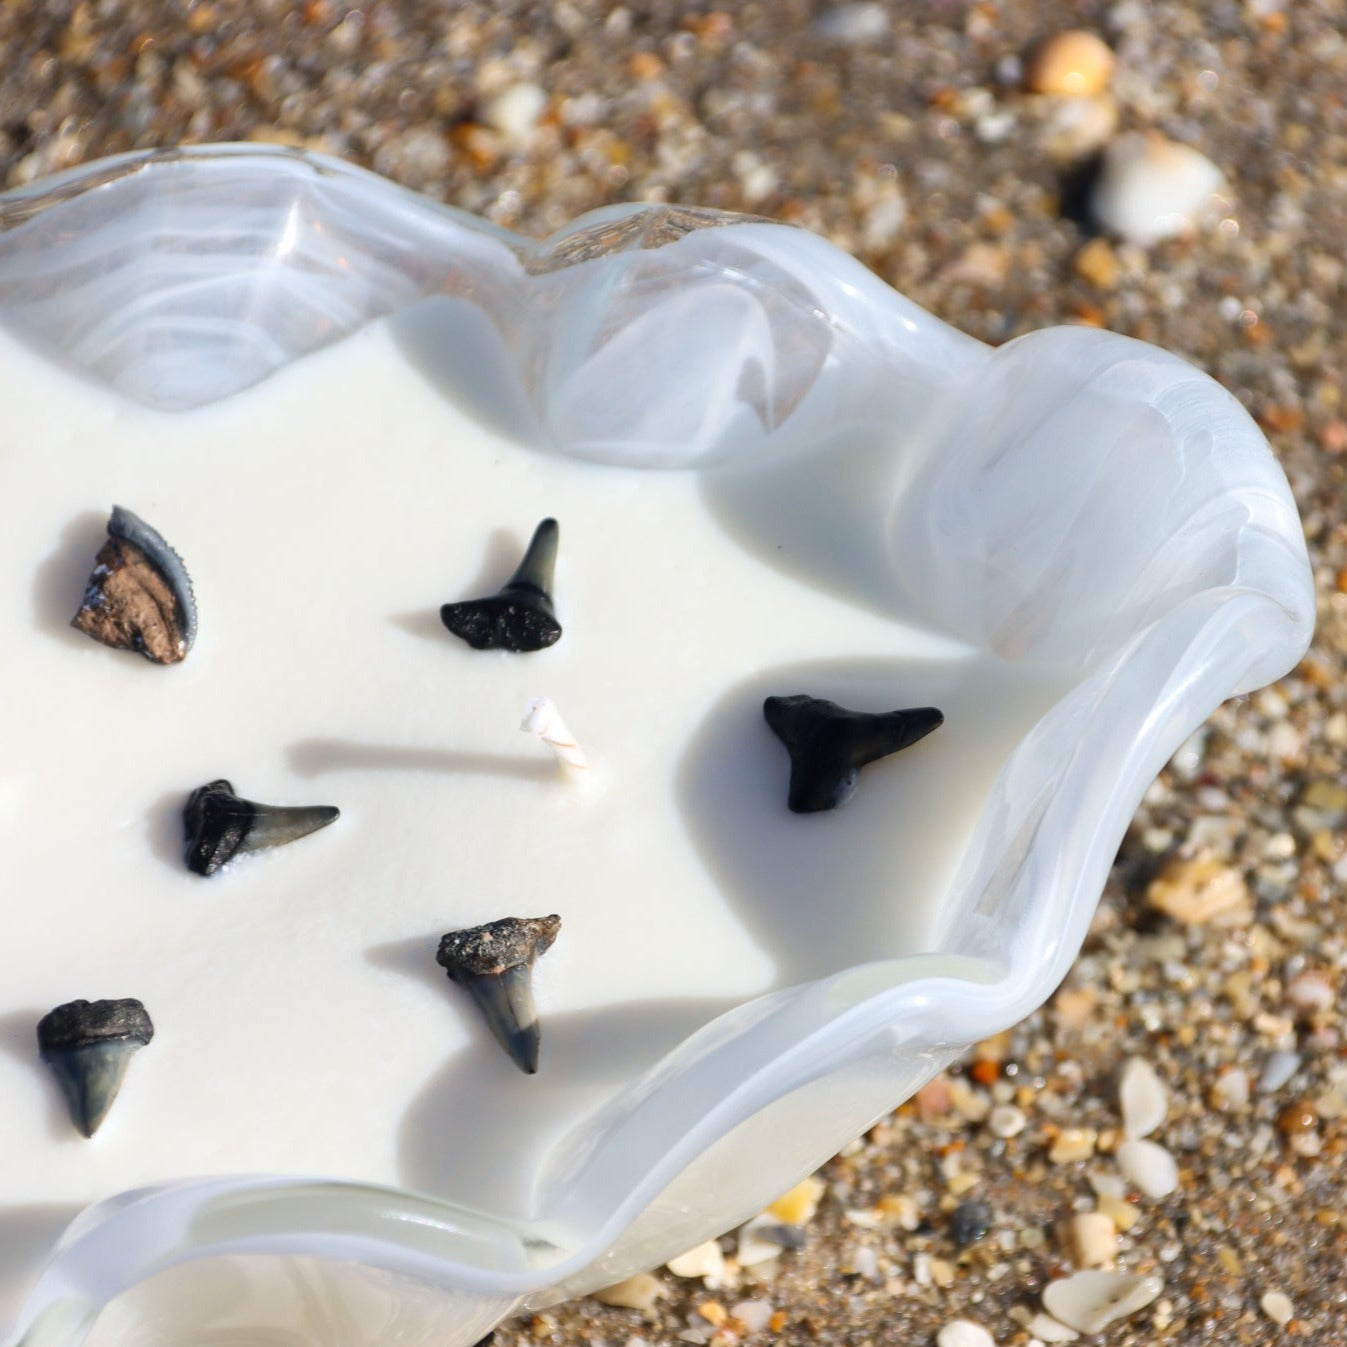 A close-up of Maya Bleu's shark tooth candle, featuring a natural soy wax blend and a real fossilized shark tooth embedded in the wax.